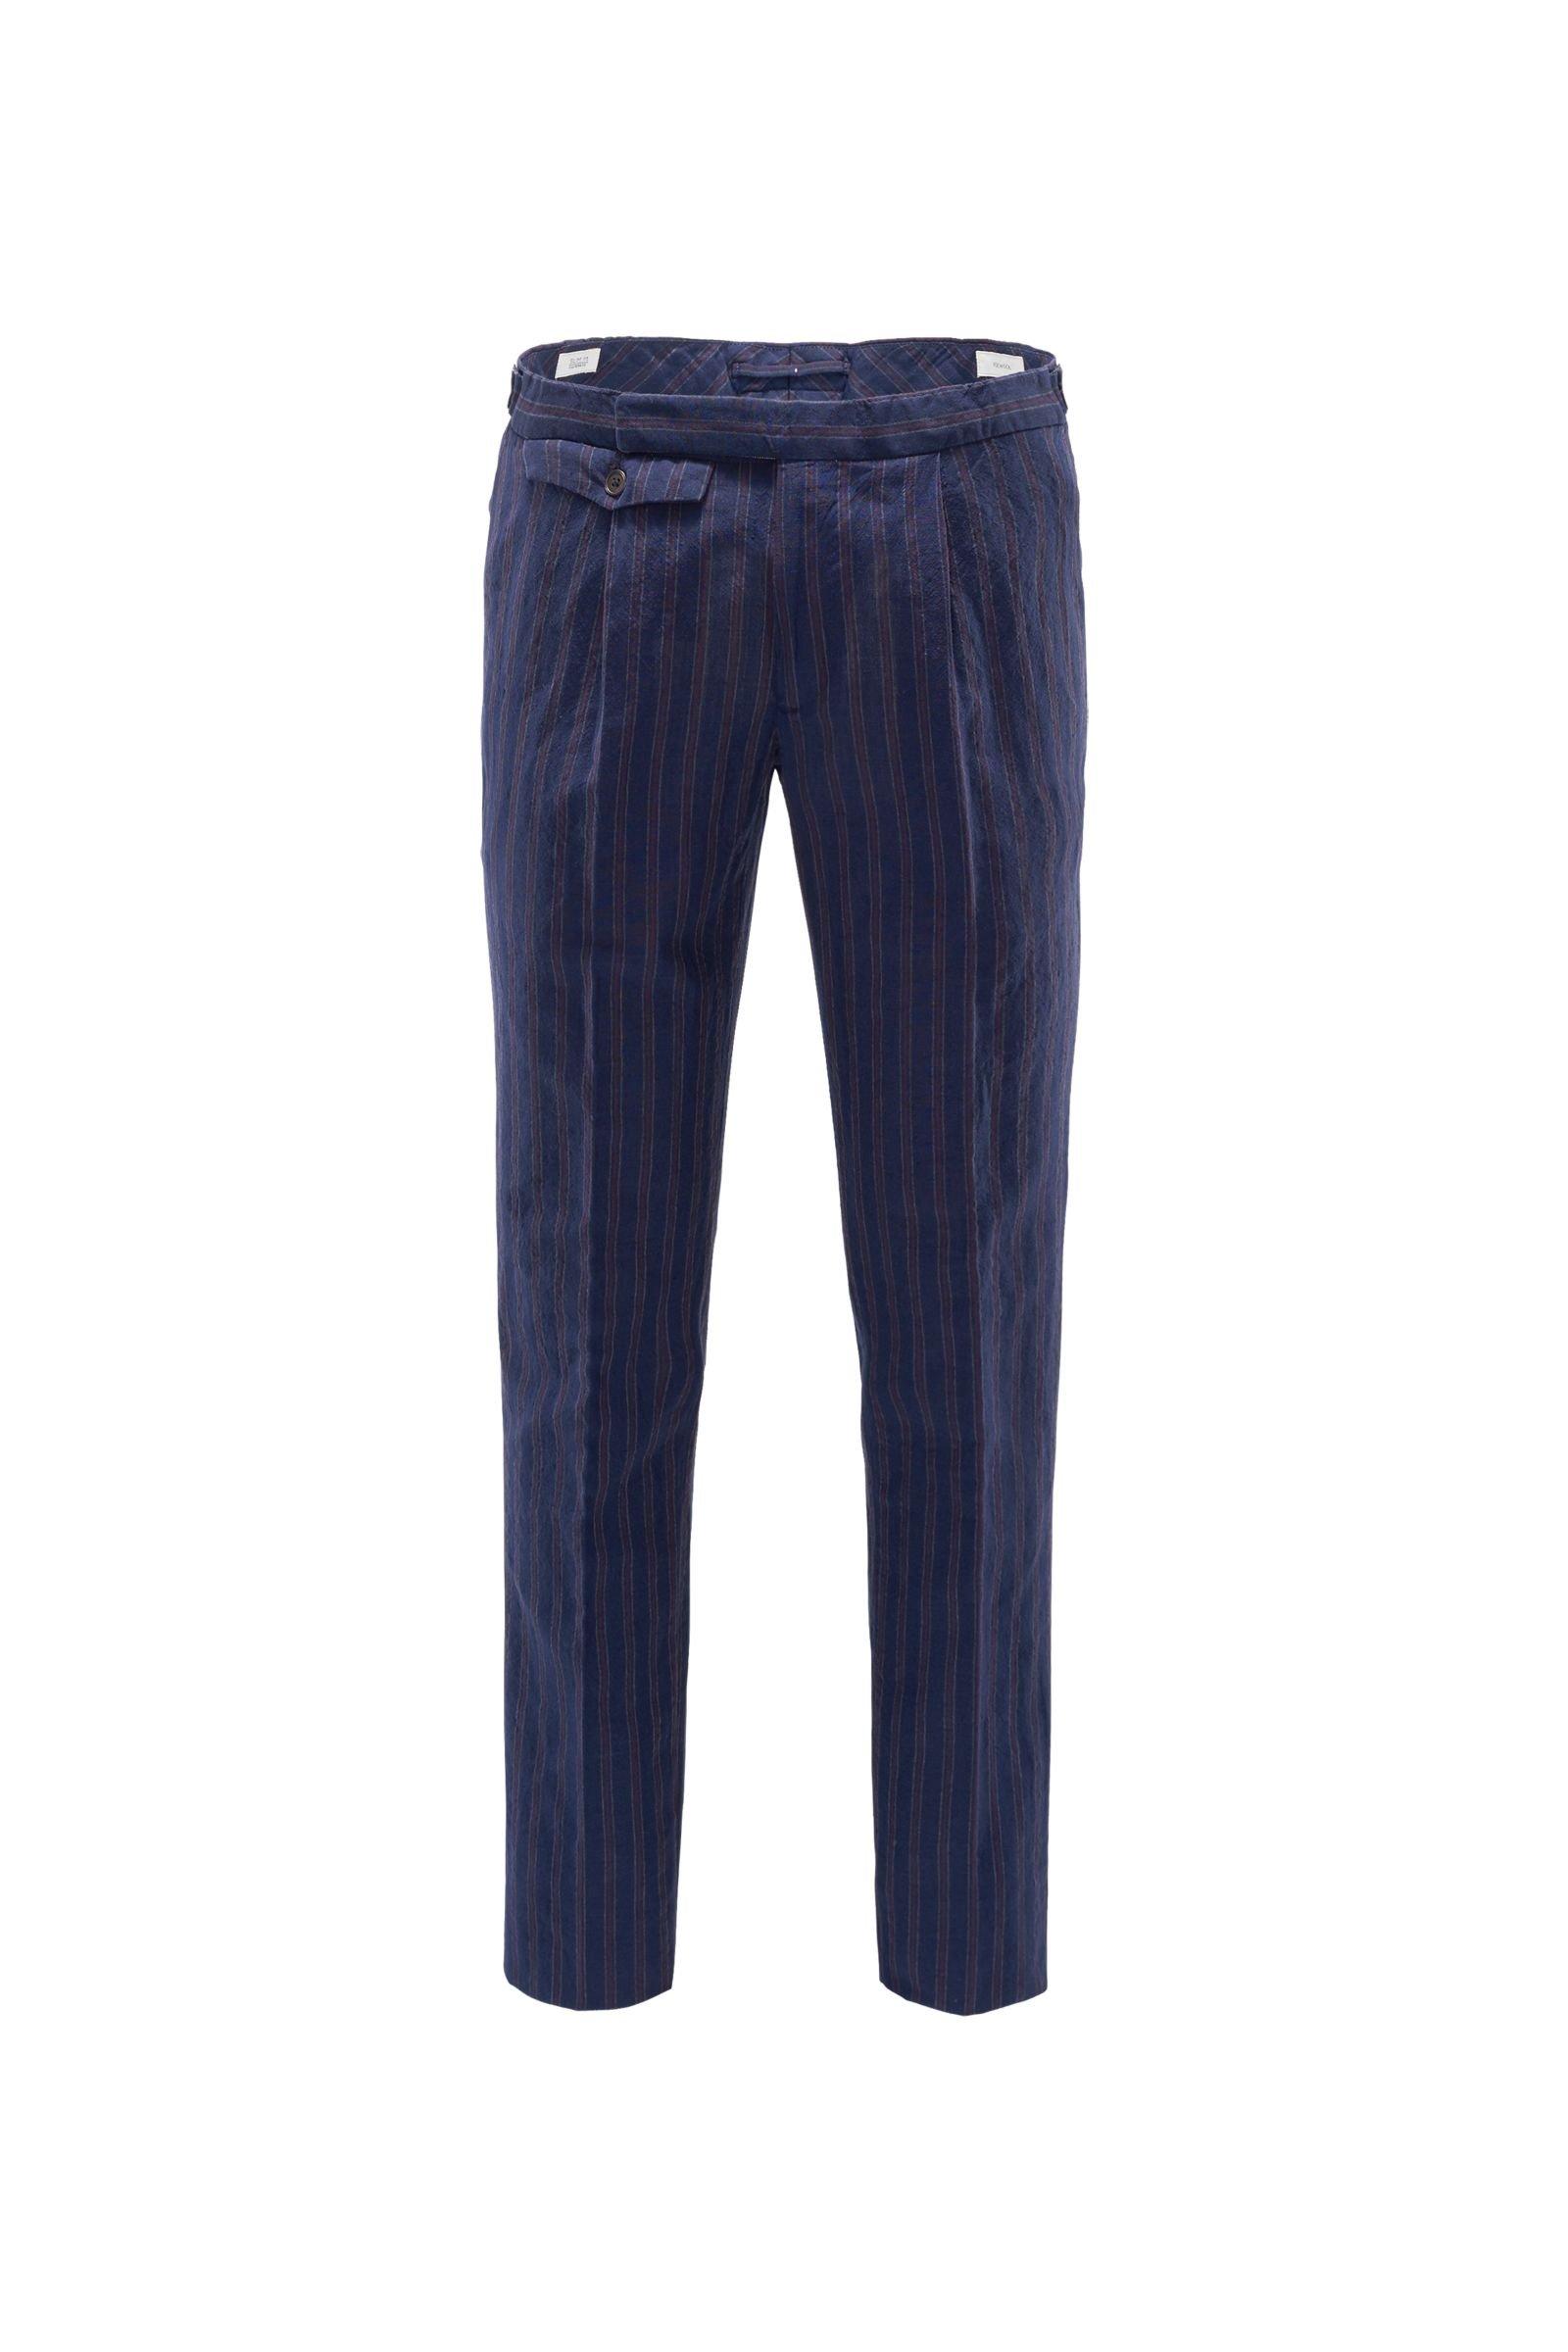 Trousers 'Icewool' navy striped